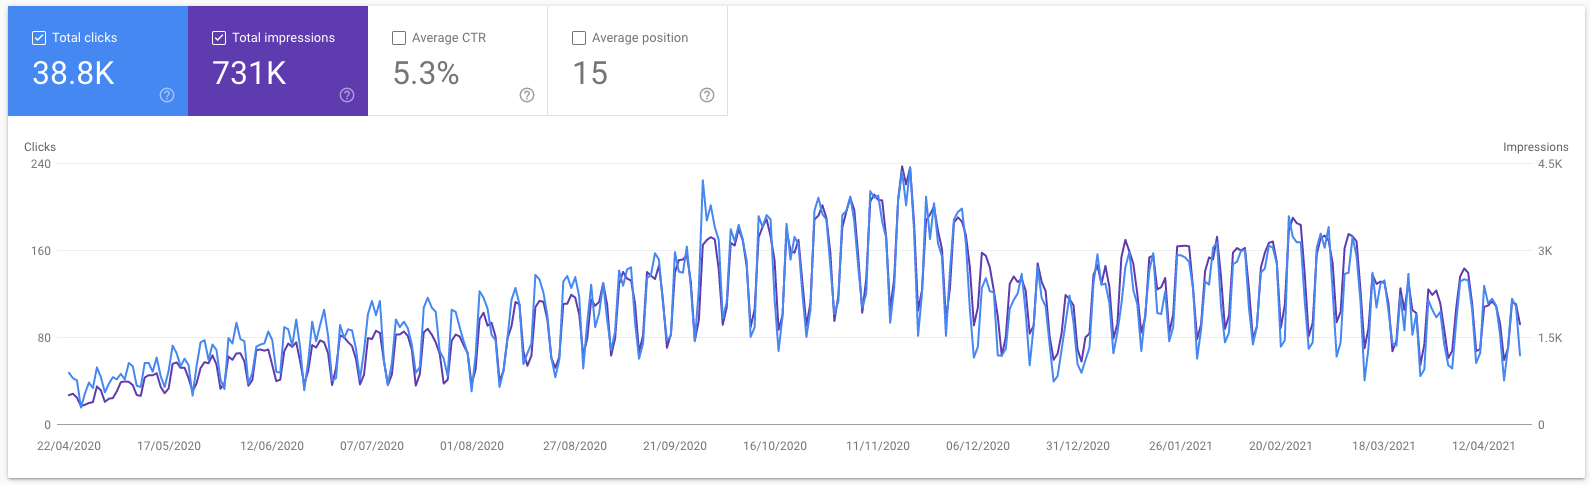 Google Search Console after 1 year